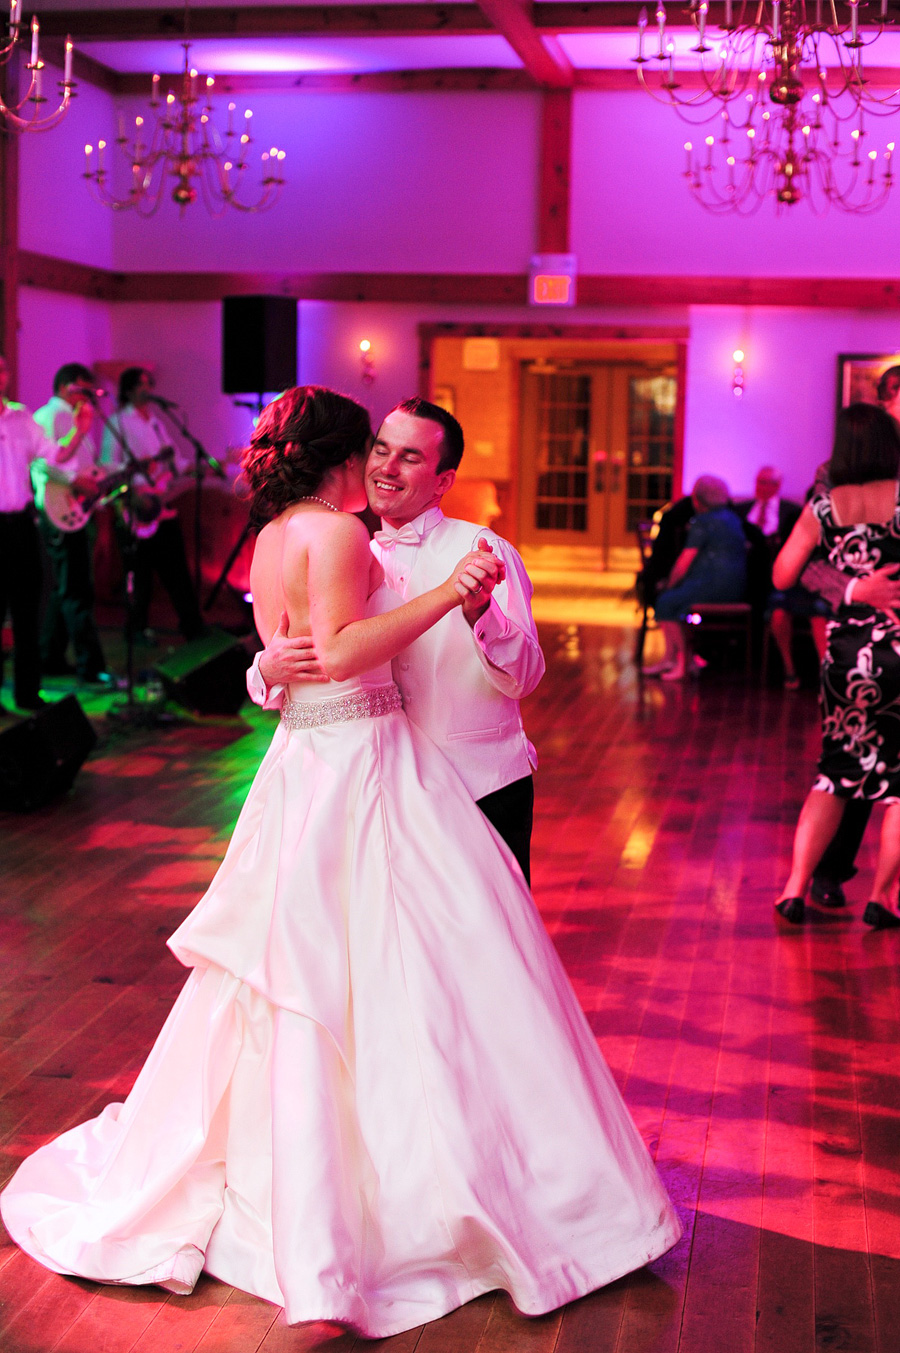 I love catching couples later in the night dancing, like this one of Lindsay & John!